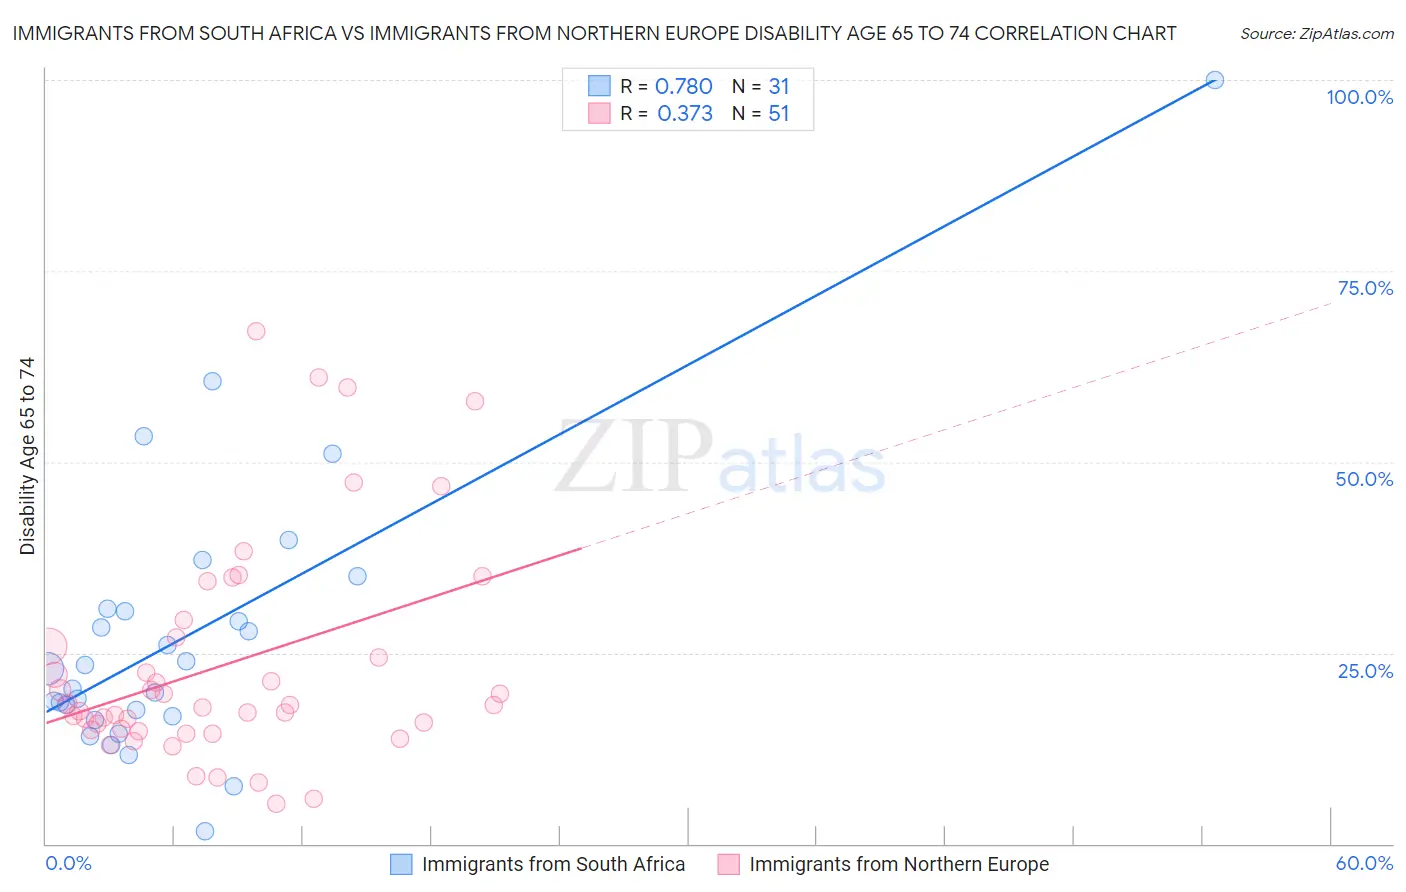 Immigrants from South Africa vs Immigrants from Northern Europe Disability Age 65 to 74